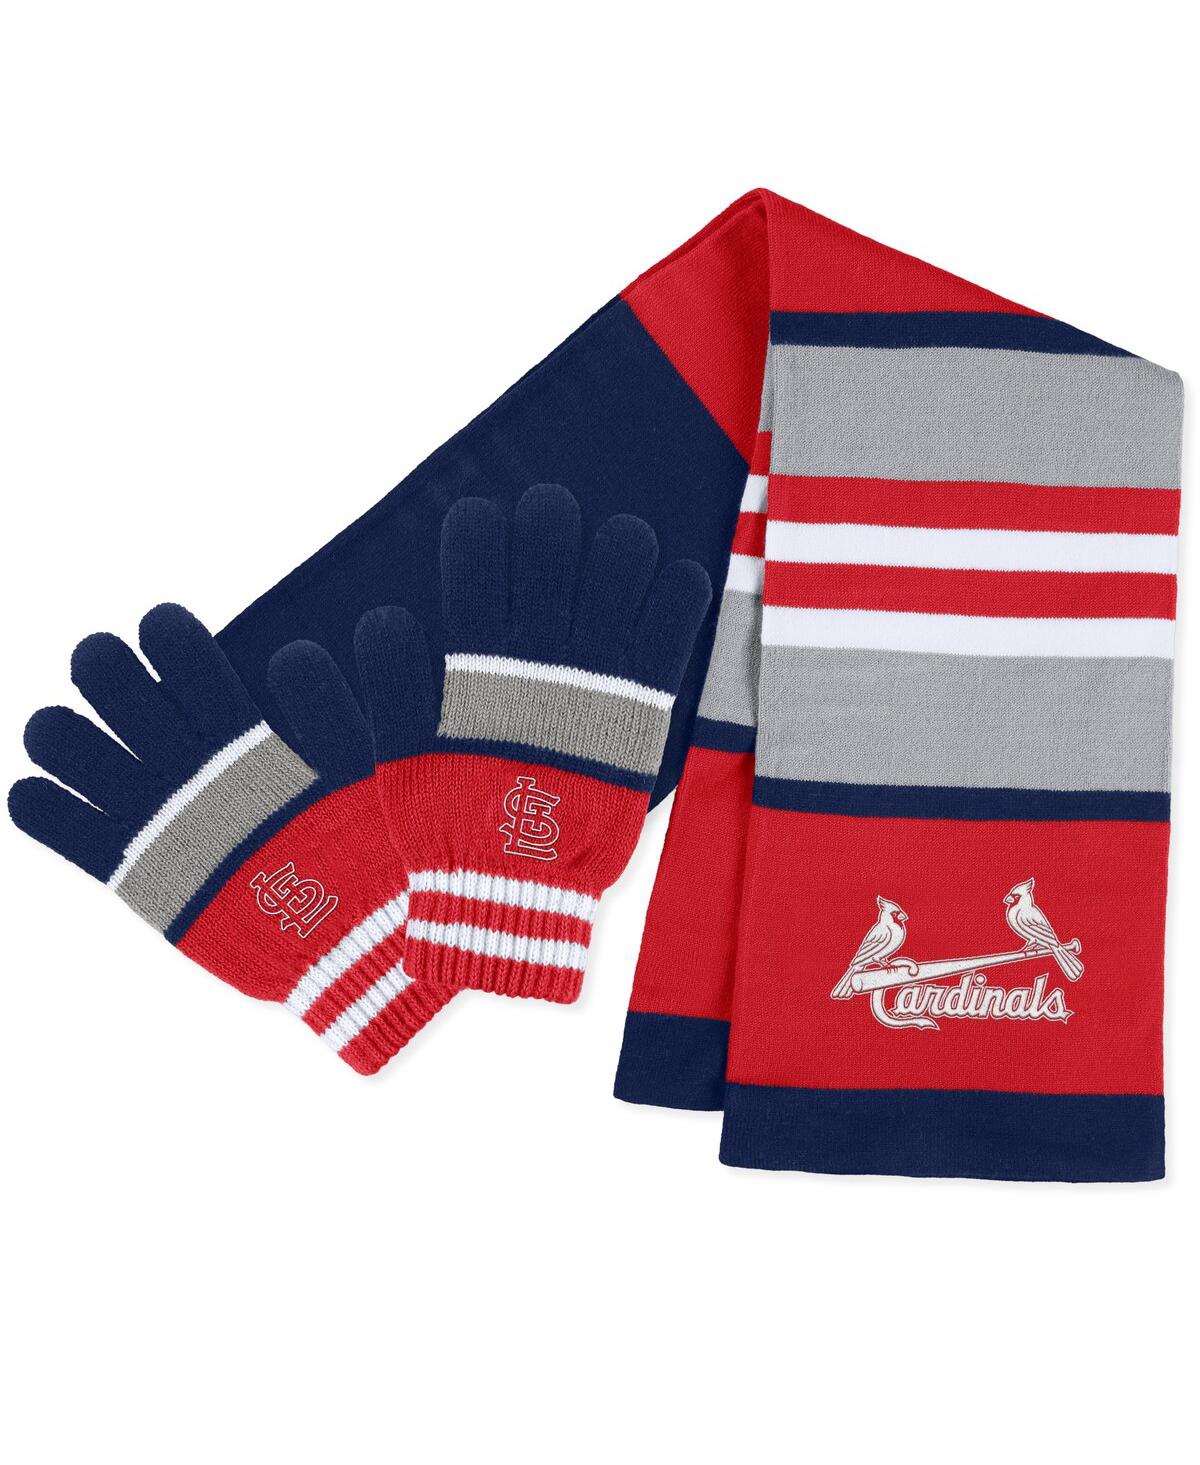 Women's Wear by Erin Andrews St. Louis Cardinals Stripe Glove and Scarf Set - Navy, Red